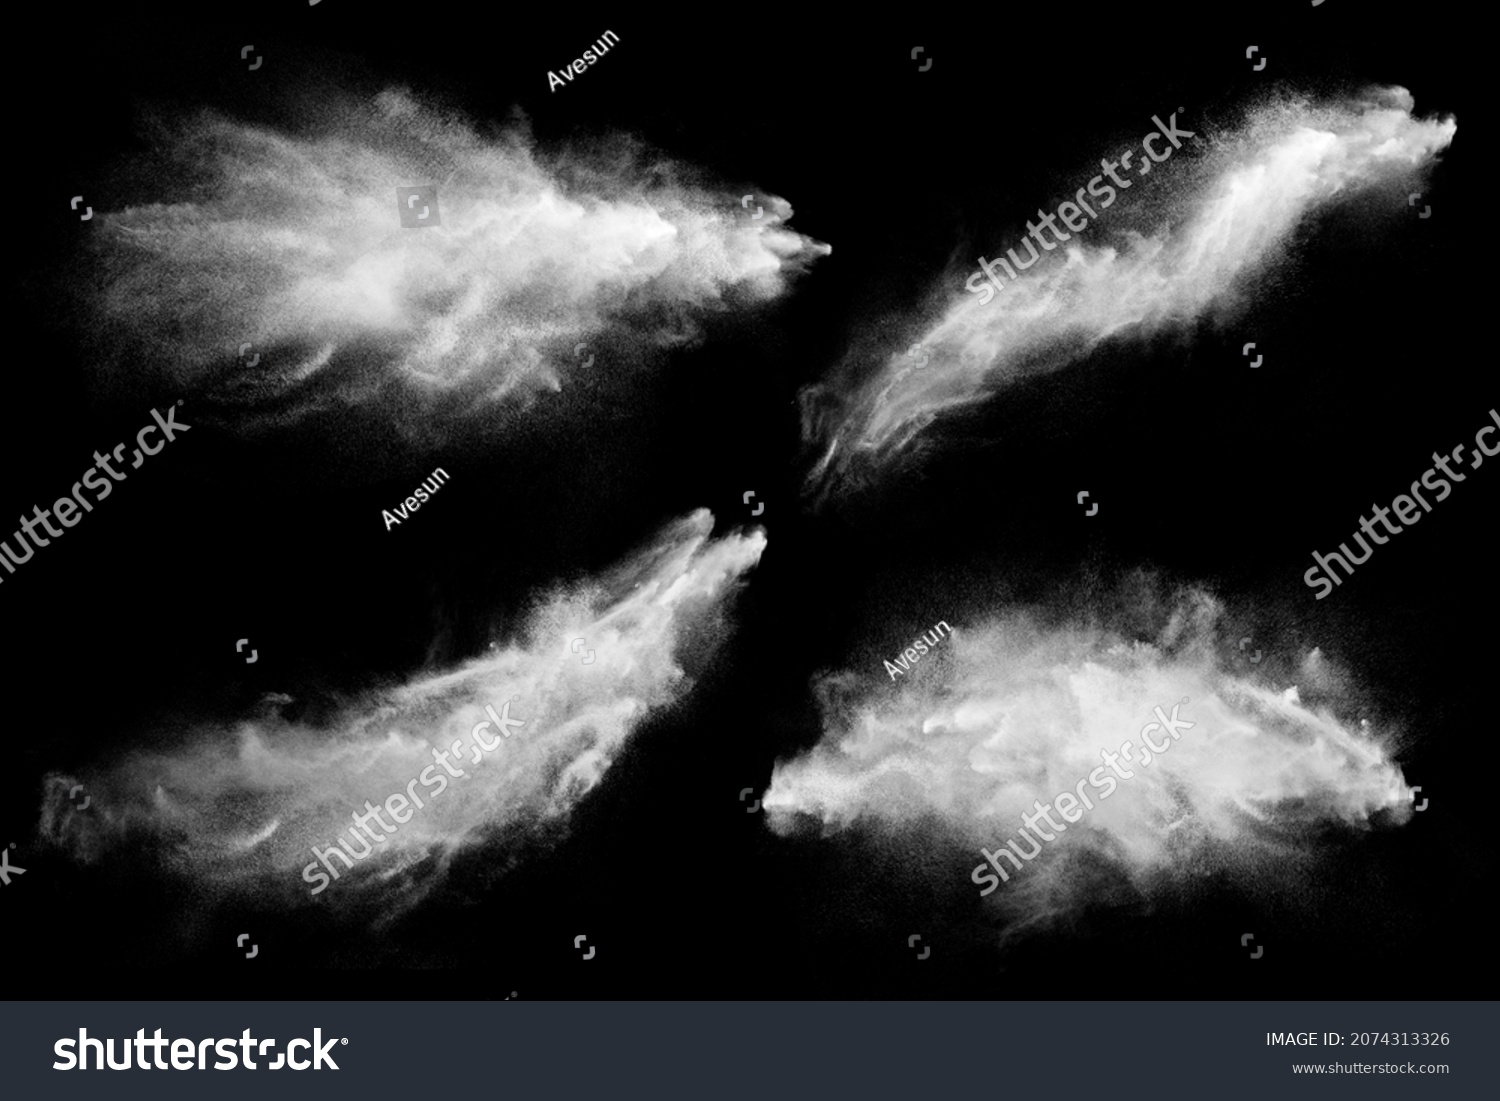 Set of dust powder splash clouds isolated on black. Flour particles exploding over dark background #2074313326